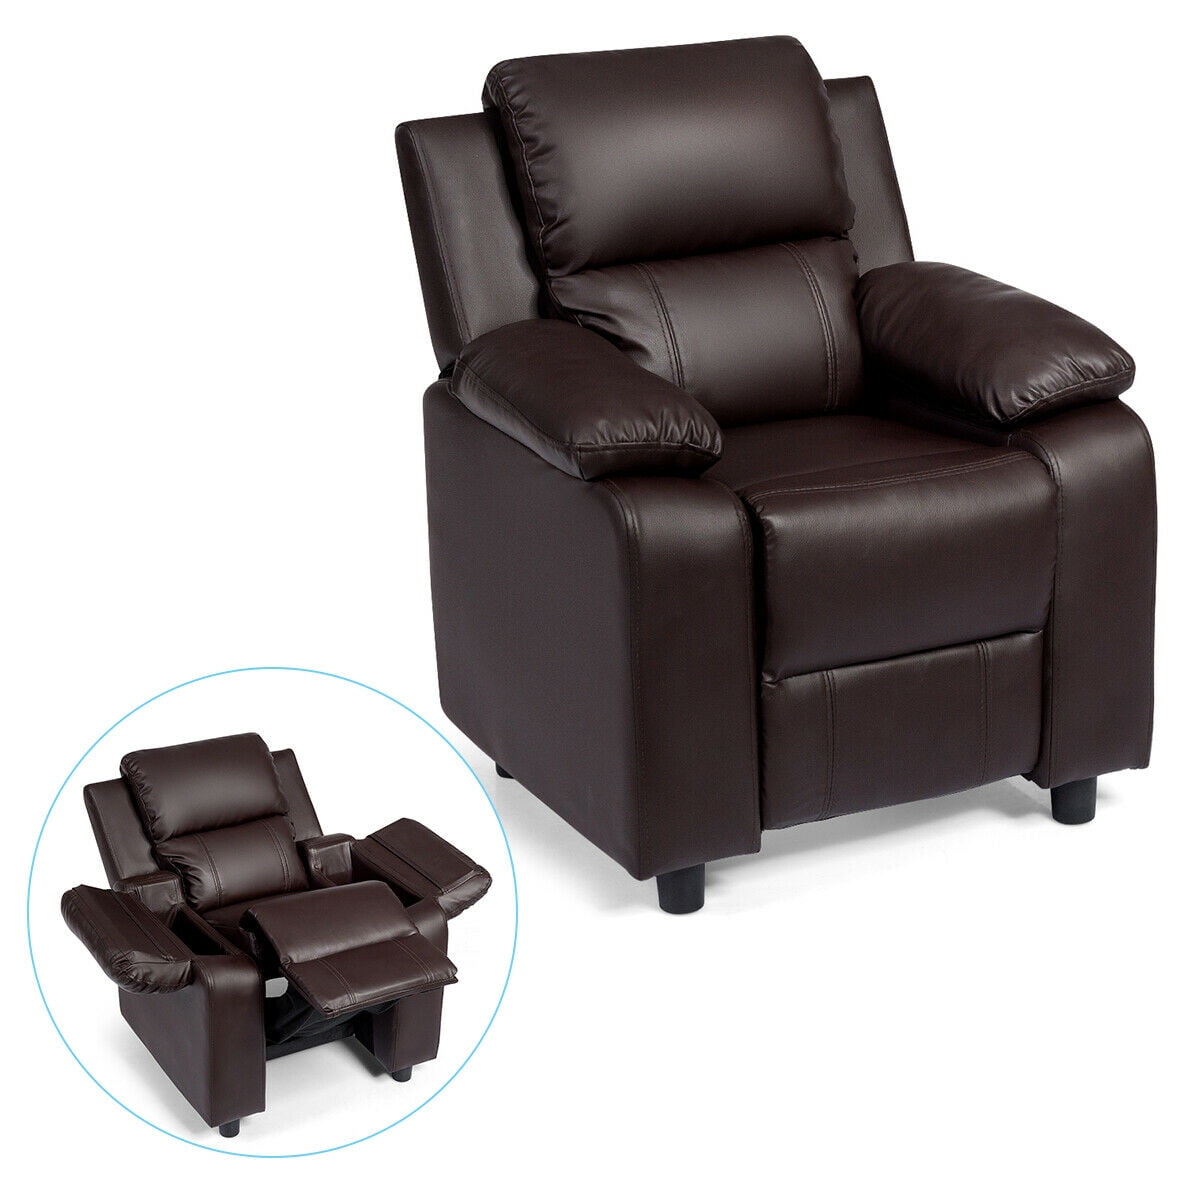 Gymax Deluxe Padded Kids Sofa Armchair, Childrens Leather Recliner